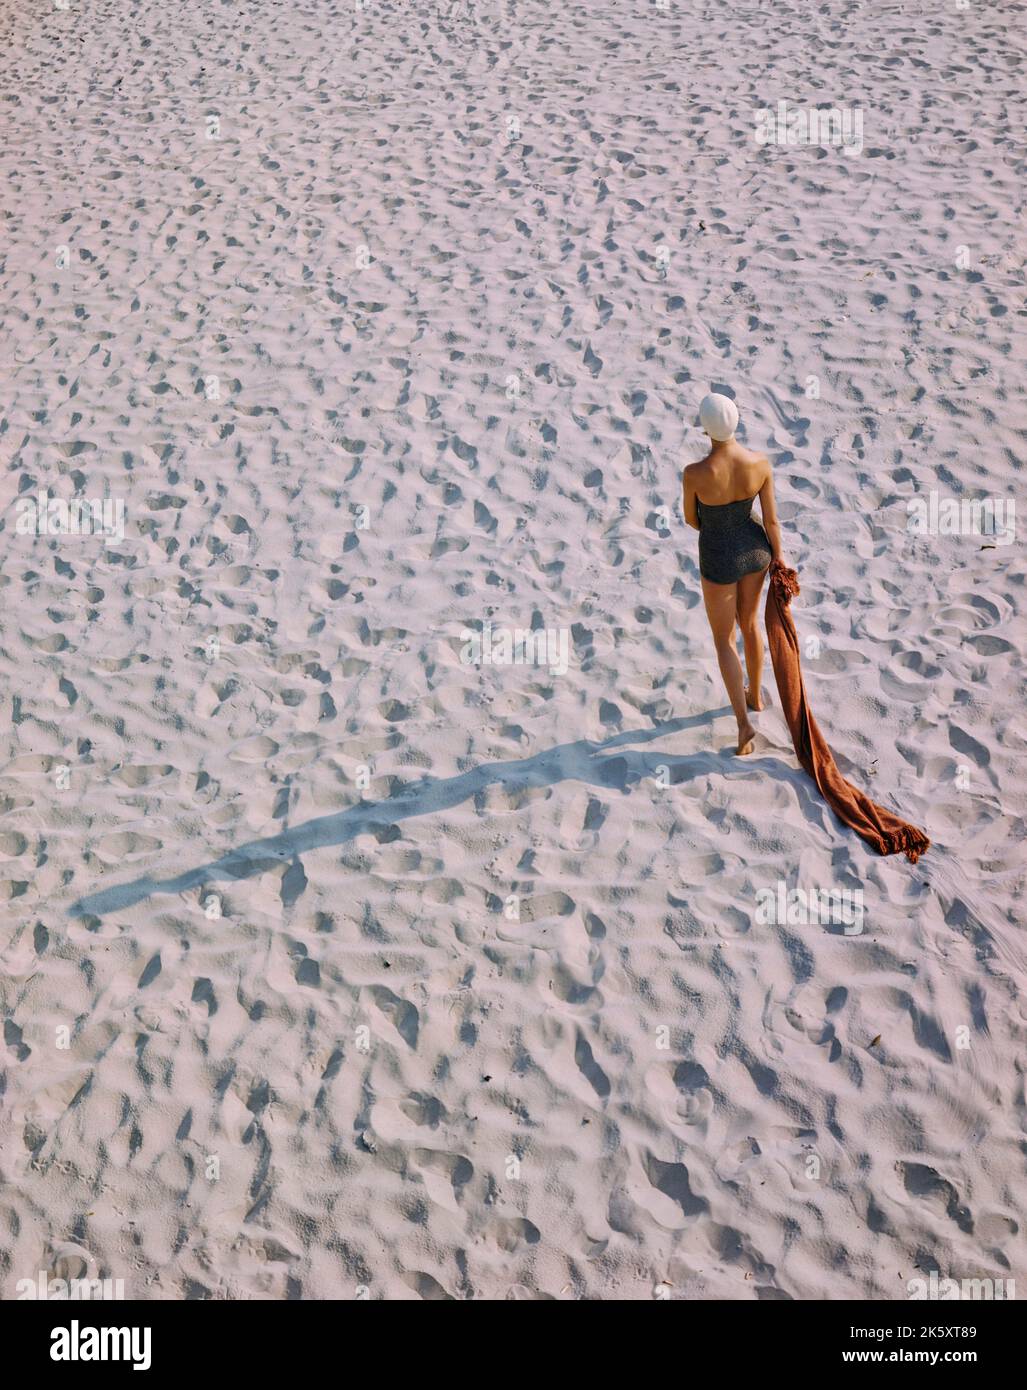 Rear View Portrait of Woman in One-Piece Swimsuit walking on Beach, Toni Frissell Collection, December 1948 Stock Photo